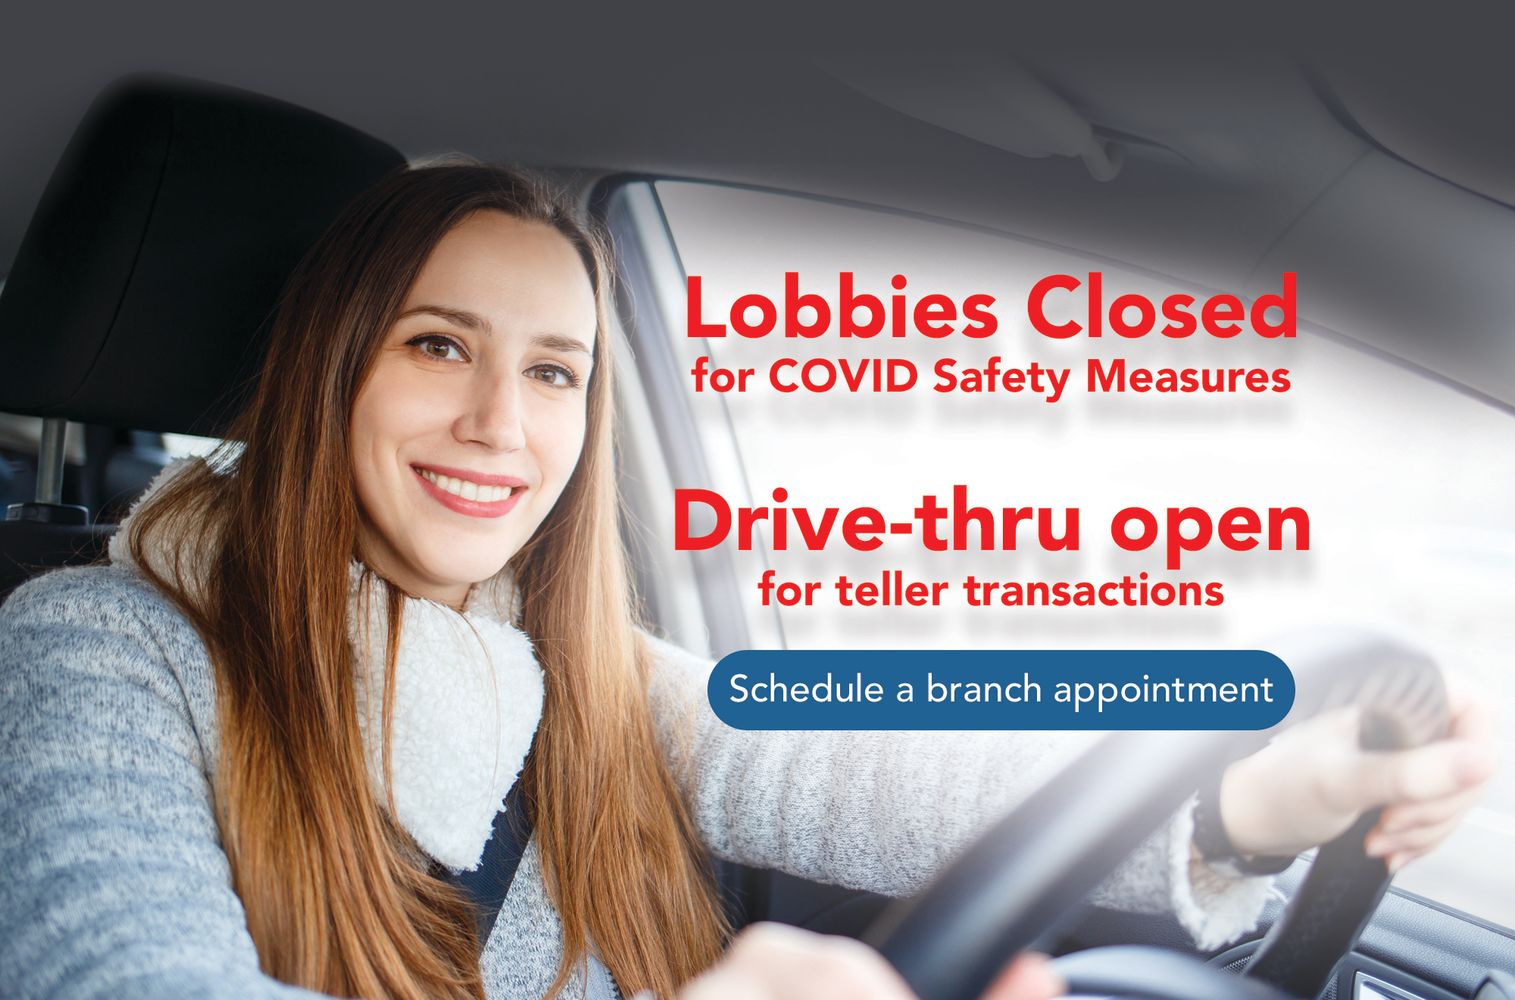 Lobbies closed January 5 - January 22. Drive-thru remains open for teller transactions. Please schedule an appointment for any other service.